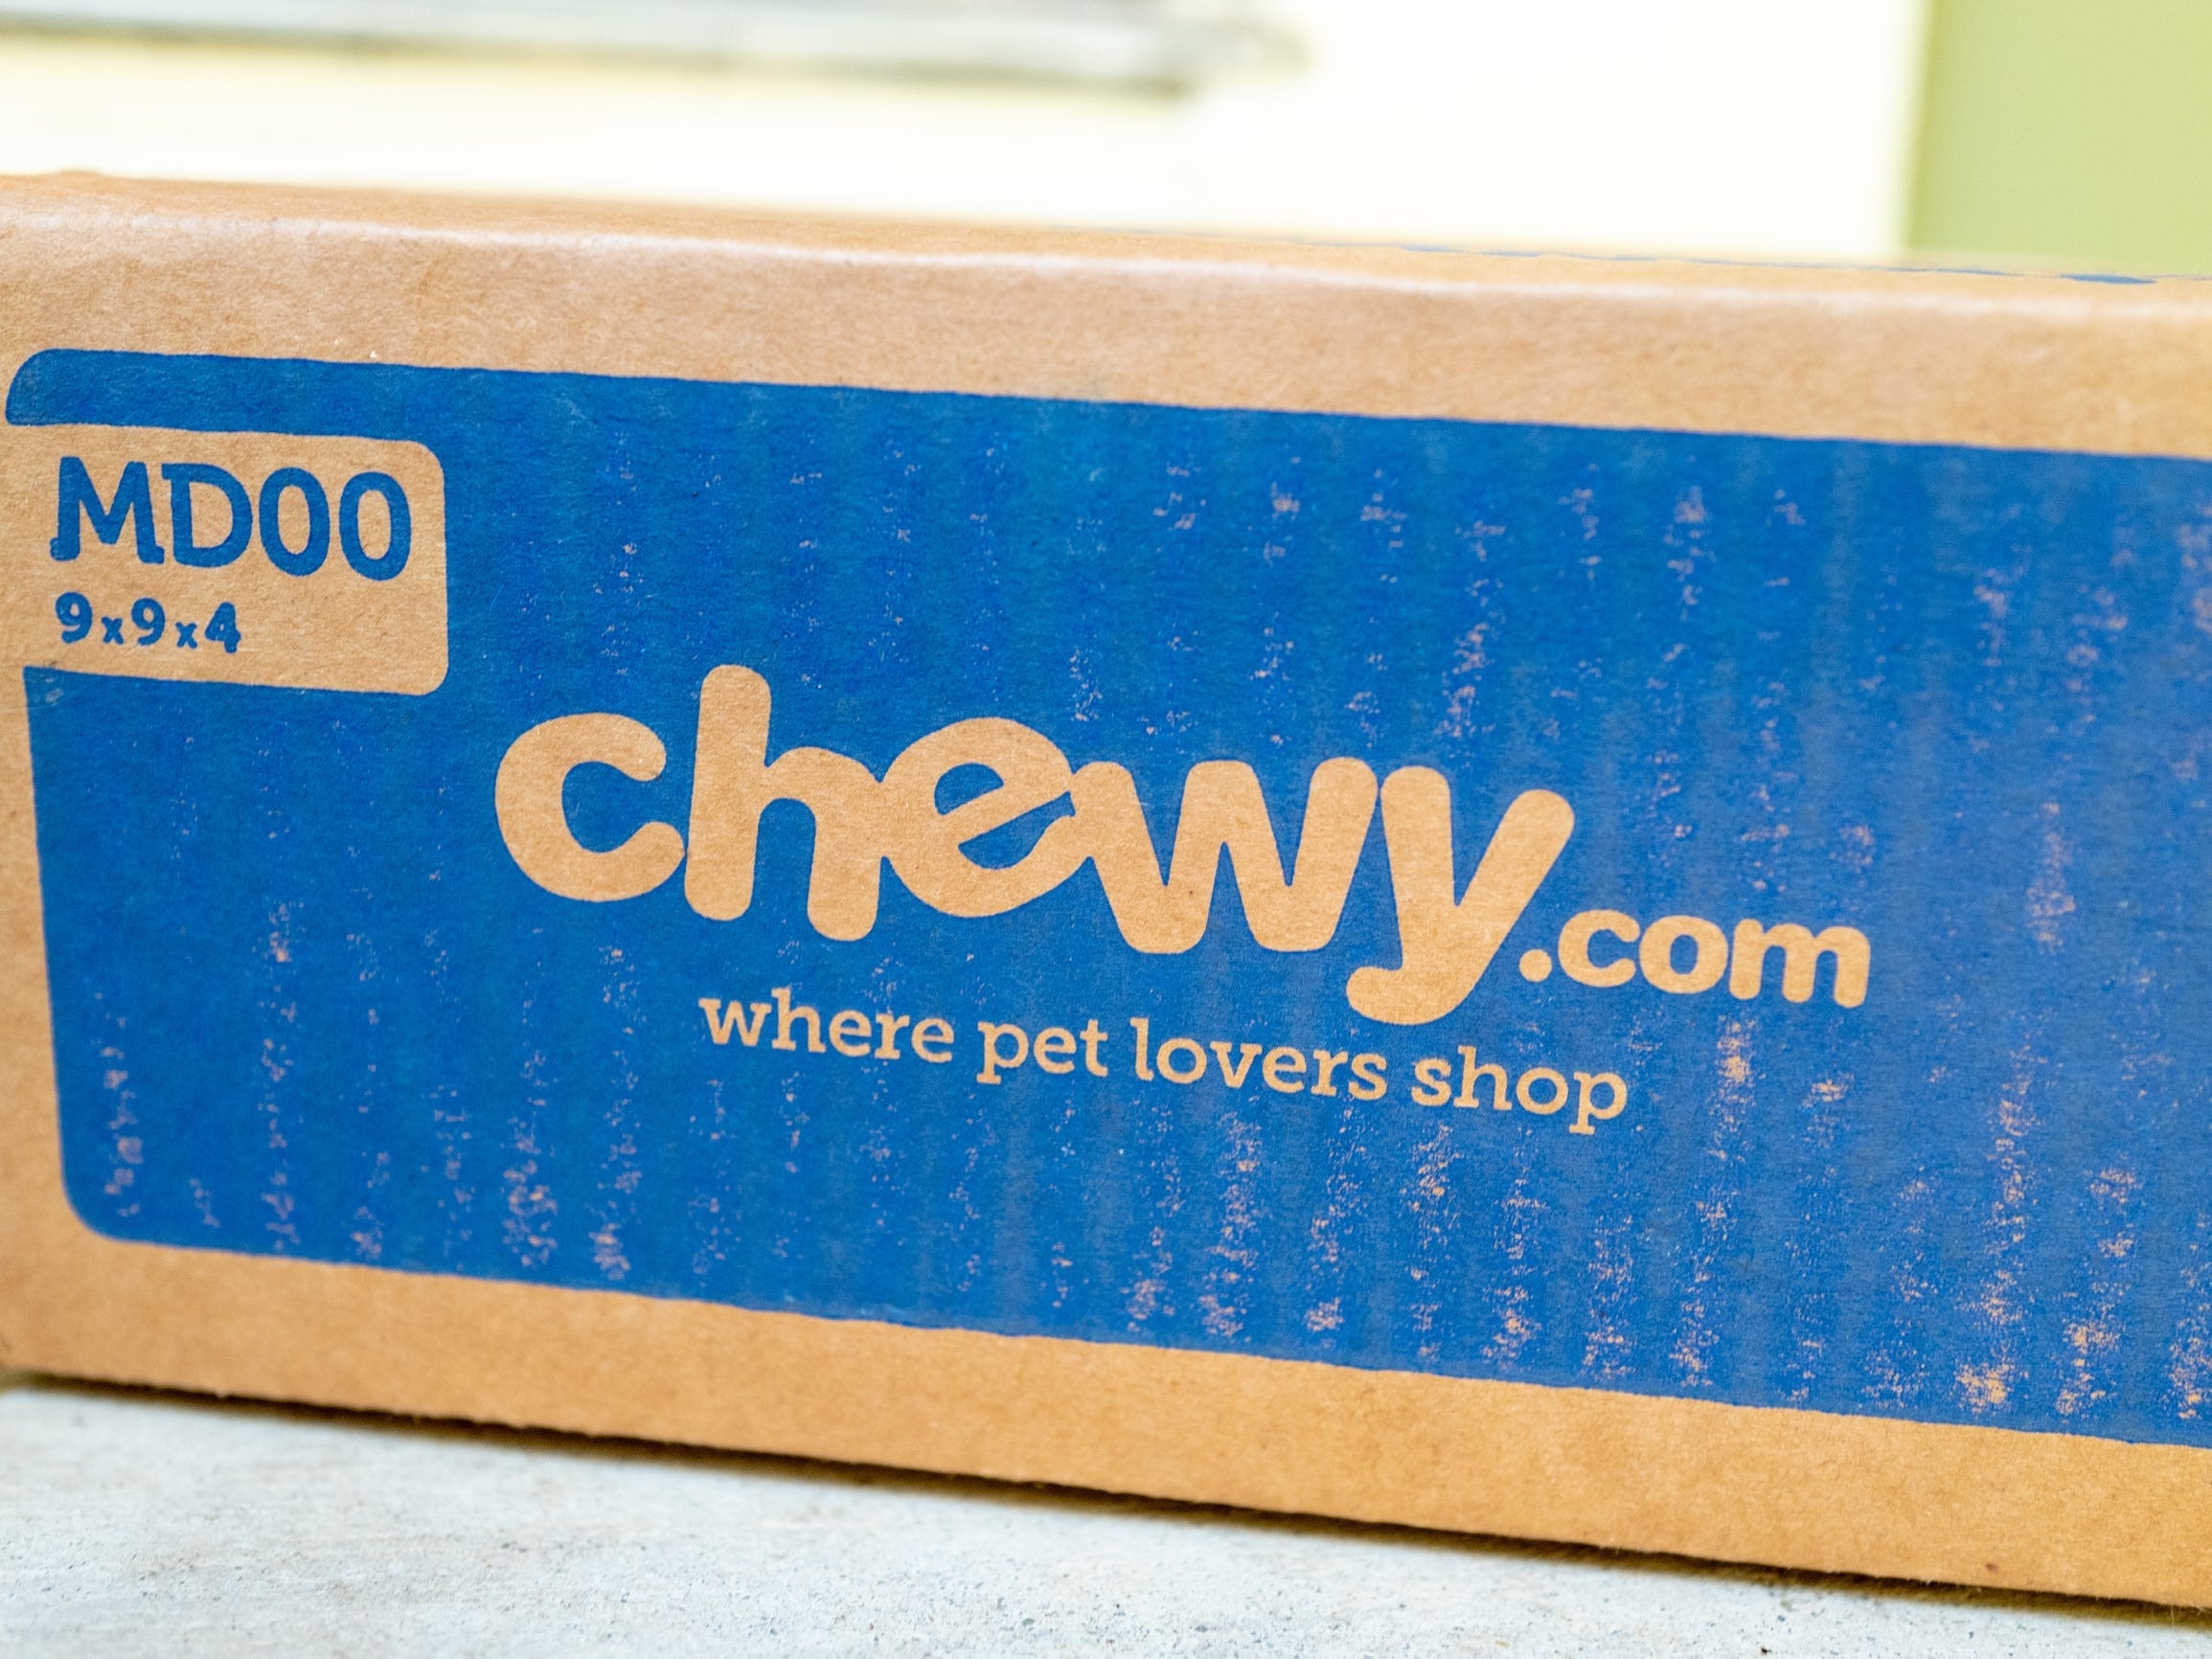 Get 20 off Chewy pet pharmacy orders with this coupon